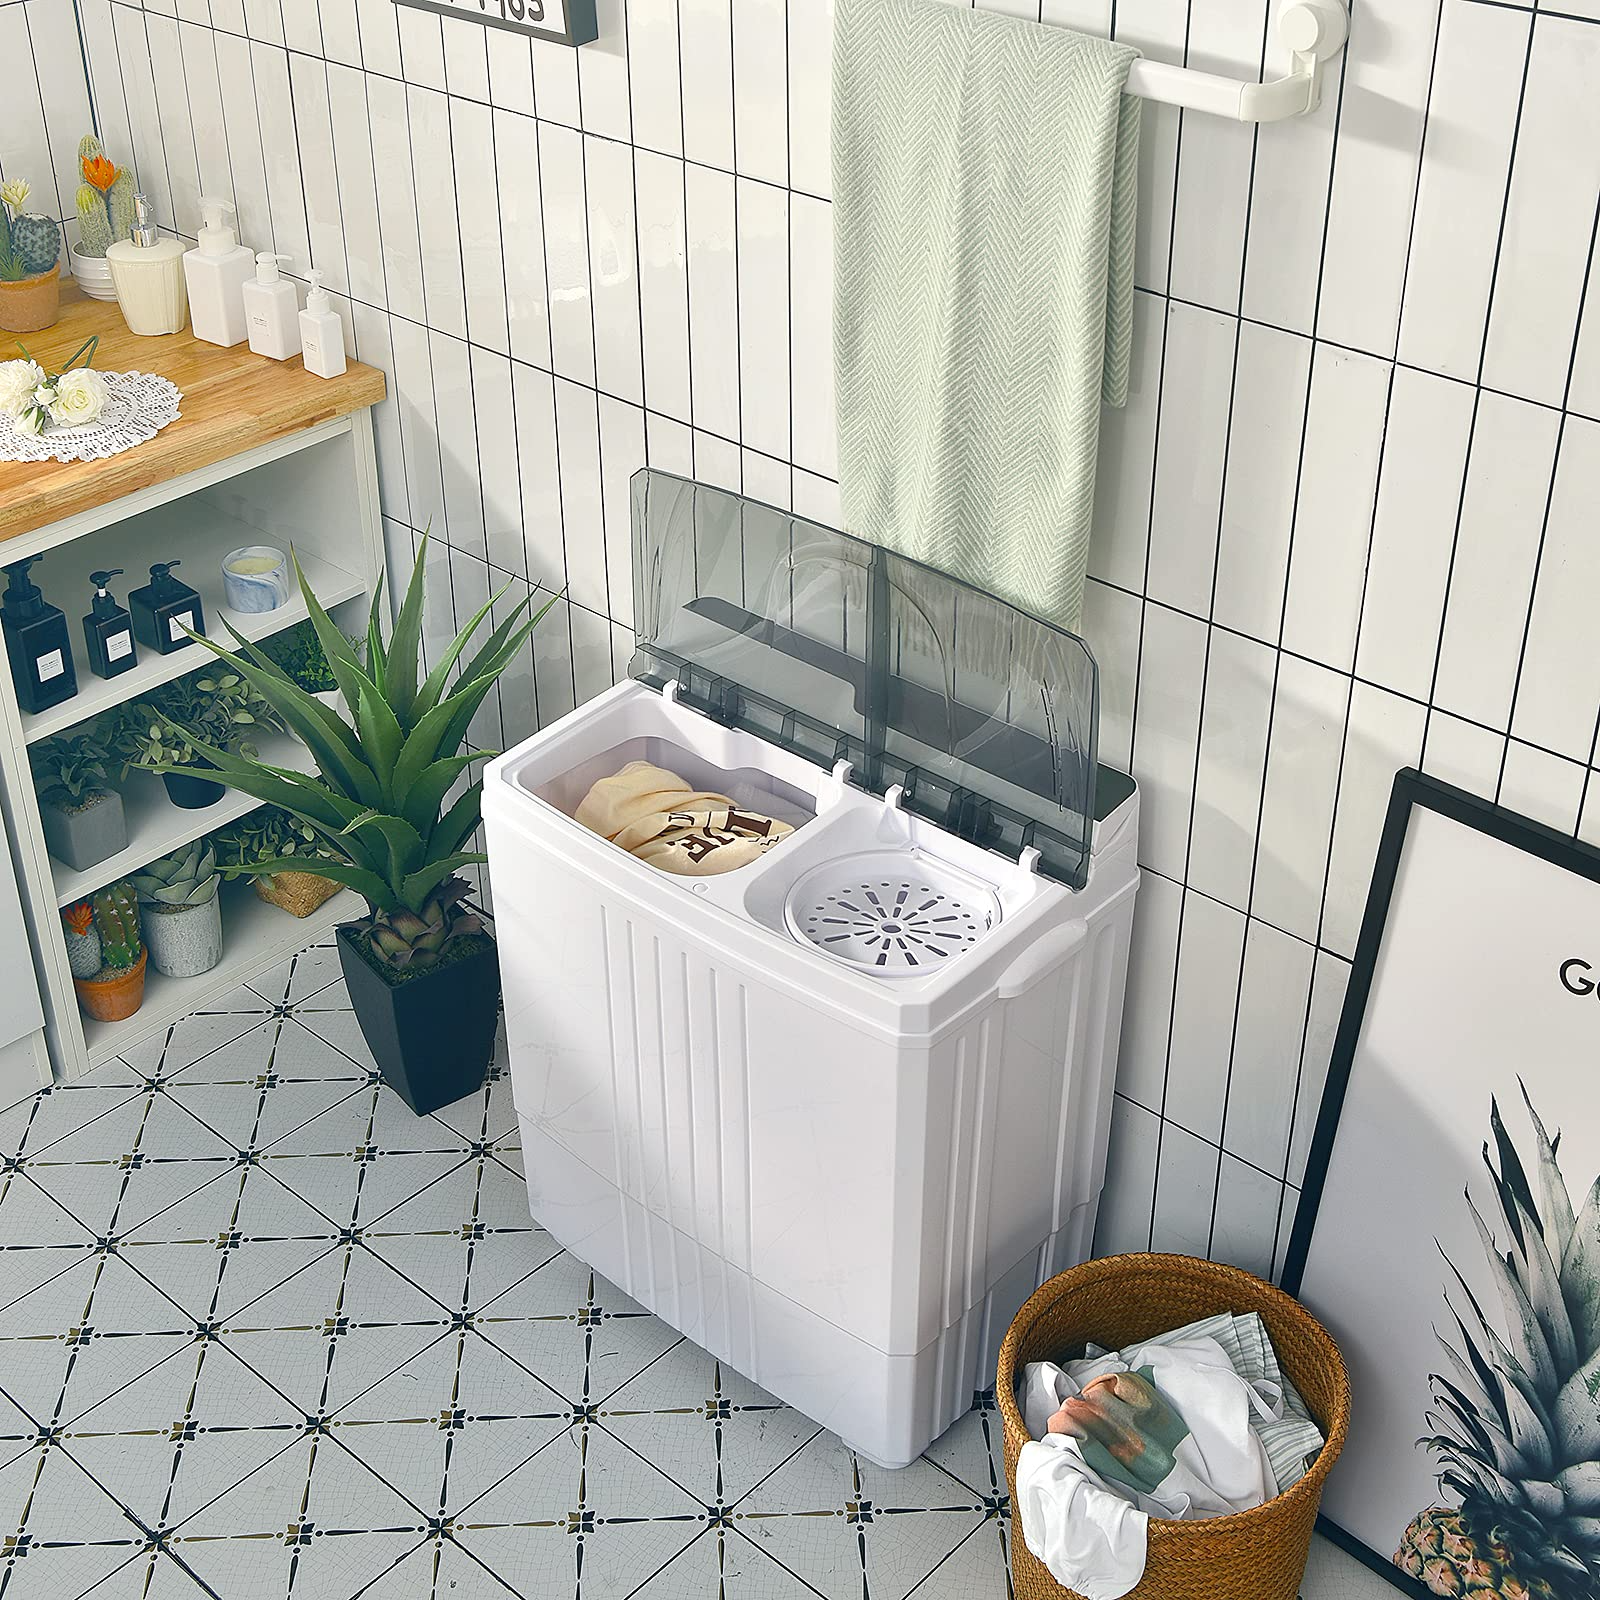 Compact Mini Laundry Washer for Apartment and Home (White & Gray)